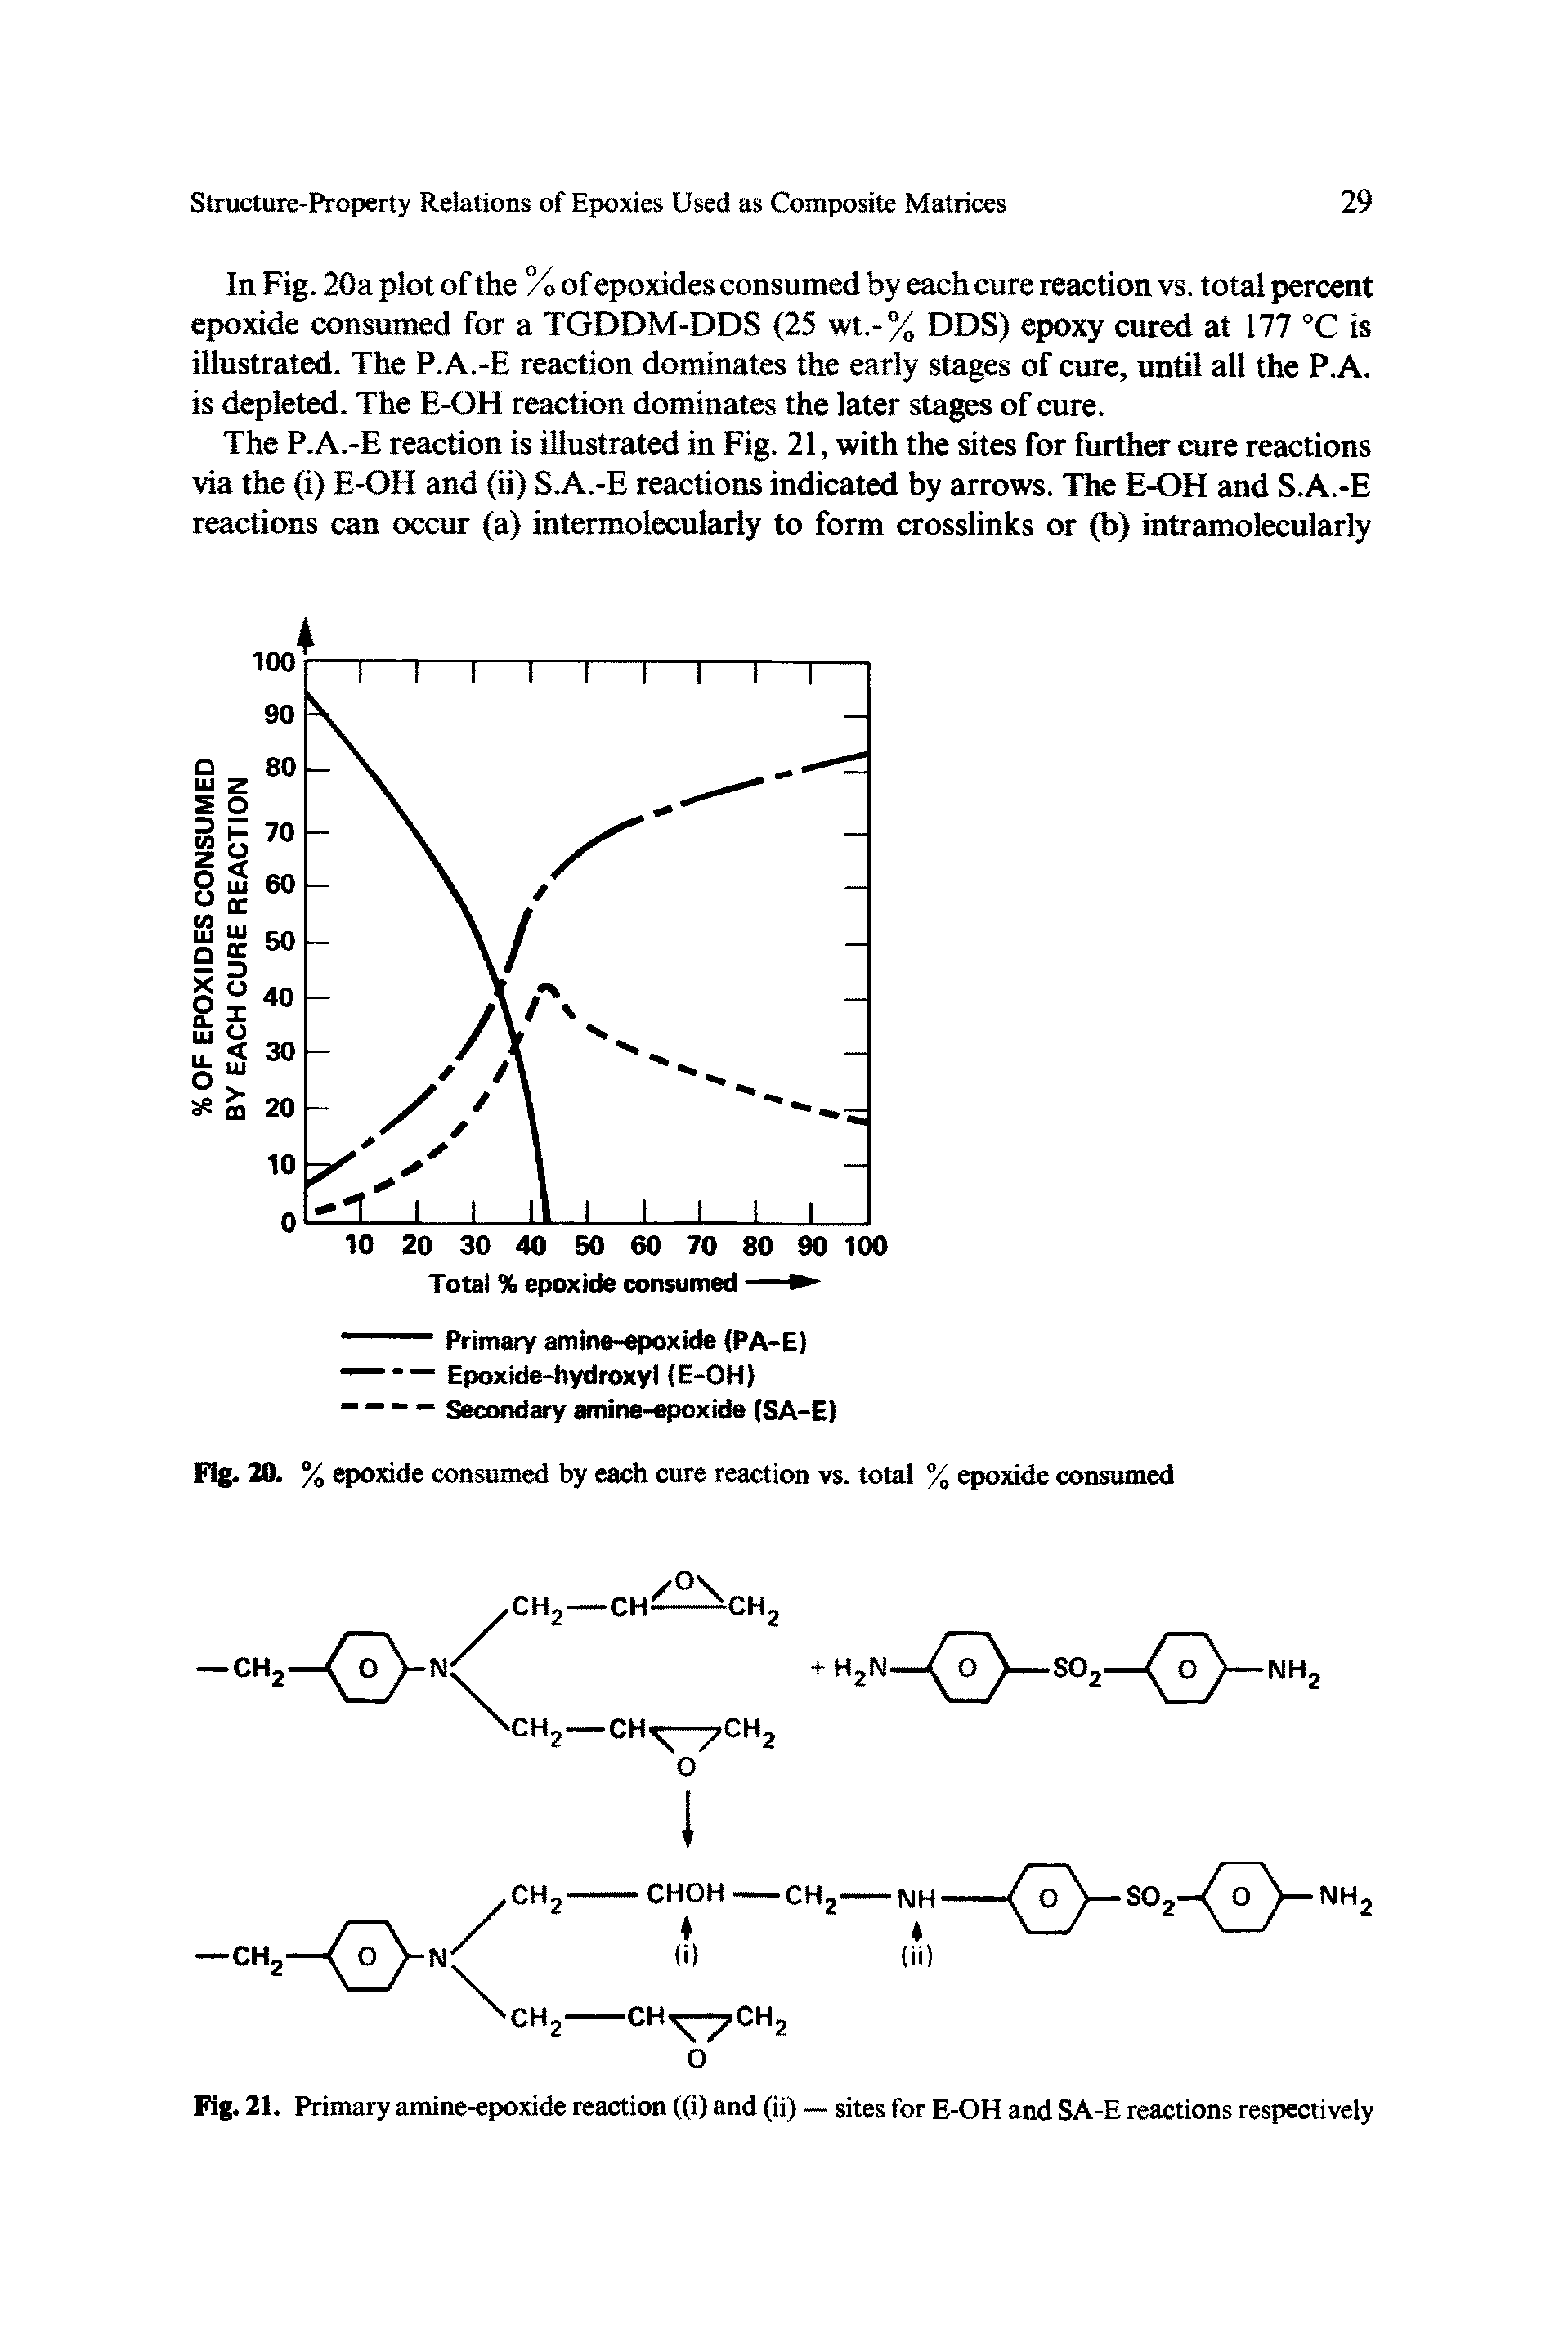 Fig. 21. Primary amine-epoxide reaction ((i) and (ii) — sites for E-OH and SA-E reactions respectively...